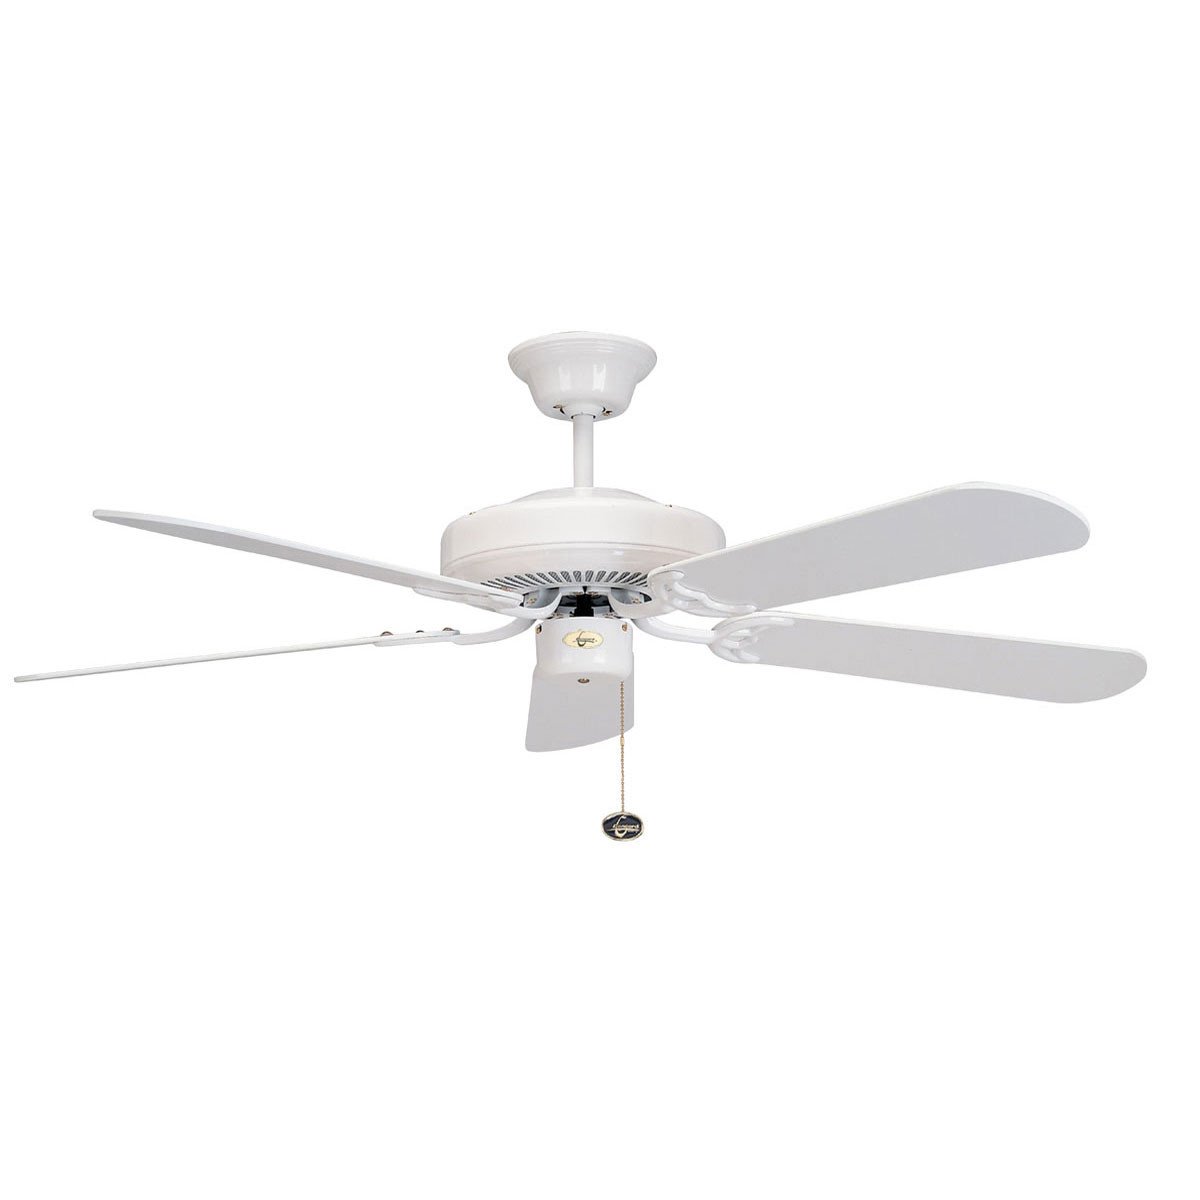 Concord Fans Decorama Energy Saver Modern 52" Small White Ceiling Fan